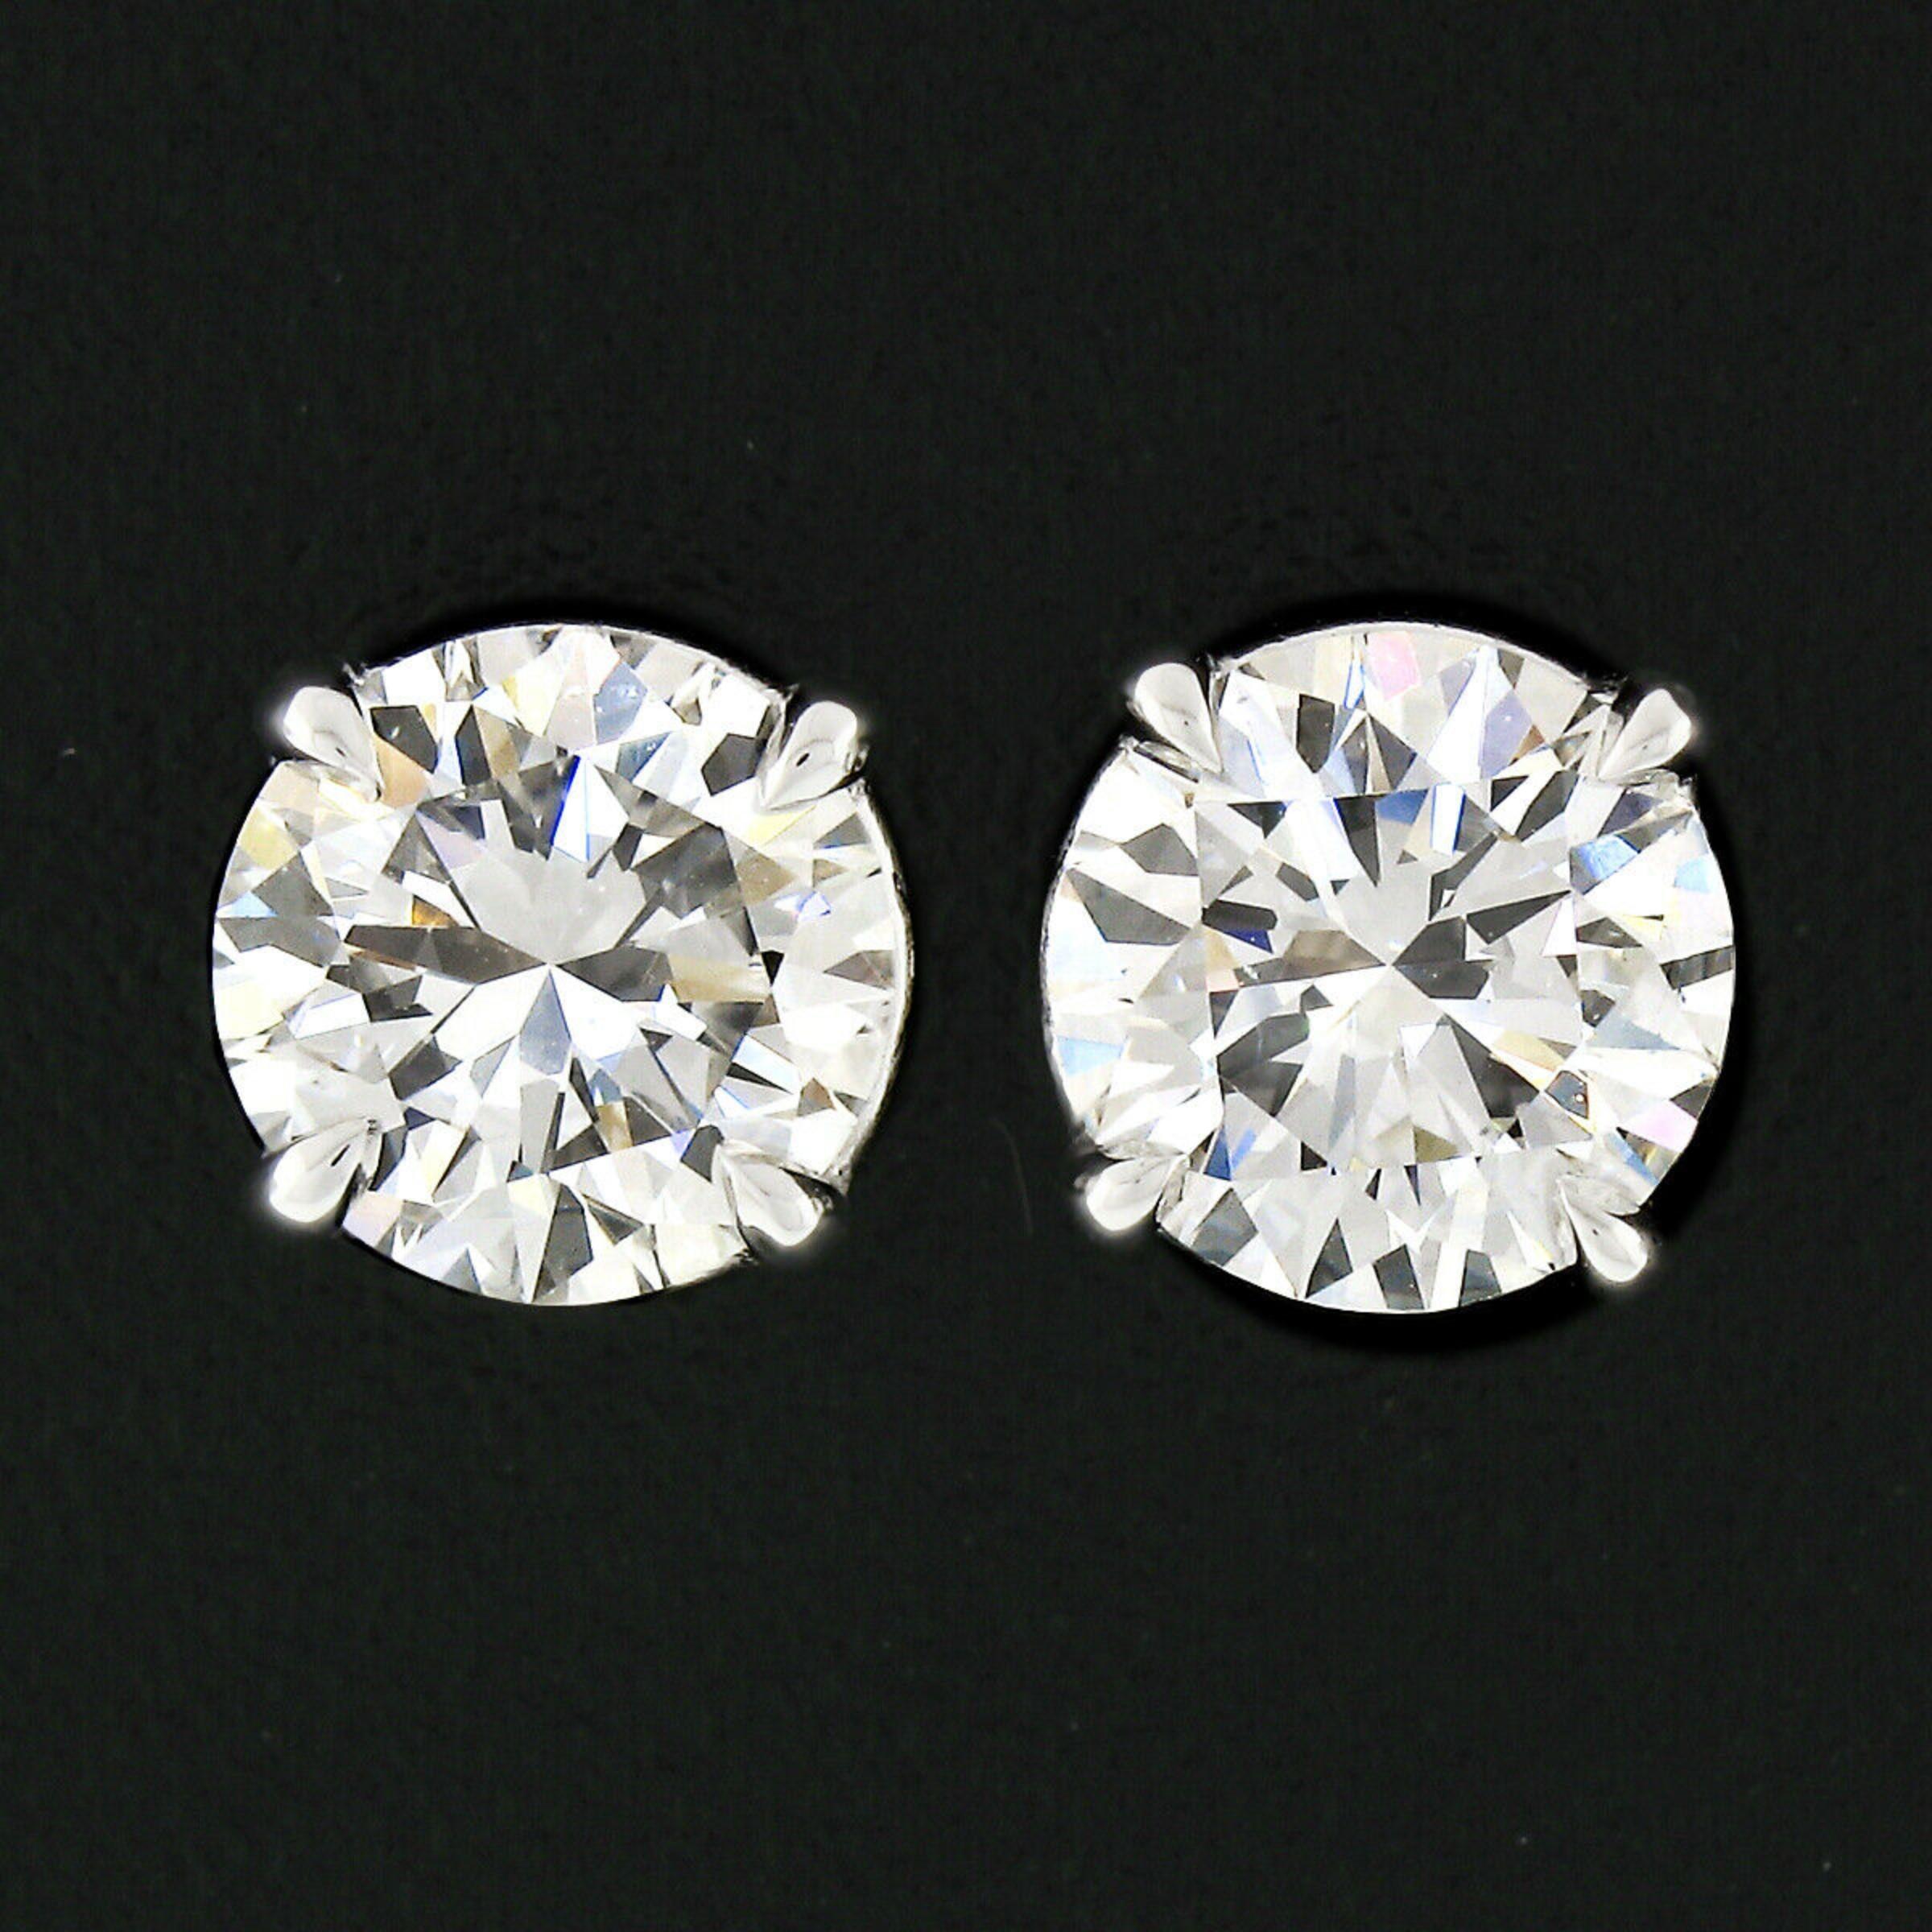 This magnificent pair of diamond stud earrings is newly crafted in solid 18k white gold and features two VERY fine quality round brilliant cut diamonds with colorless F & G color and solidly loupe-clean with VVS1 & VS1 clarity. They are both